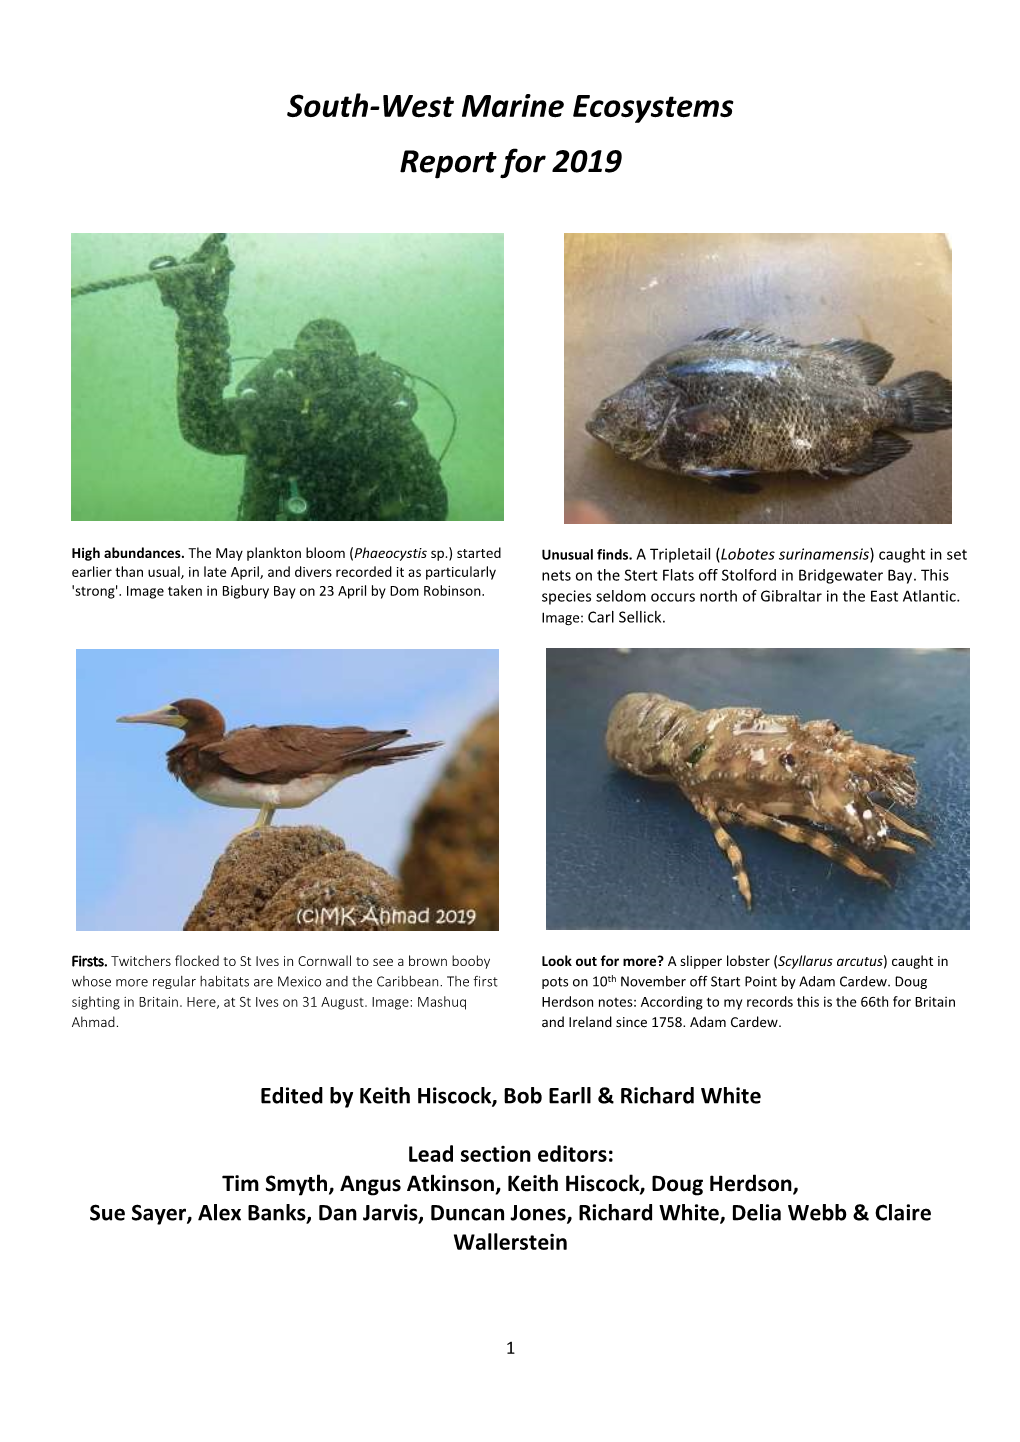 South-West Marine Ecosystems Report for 2019